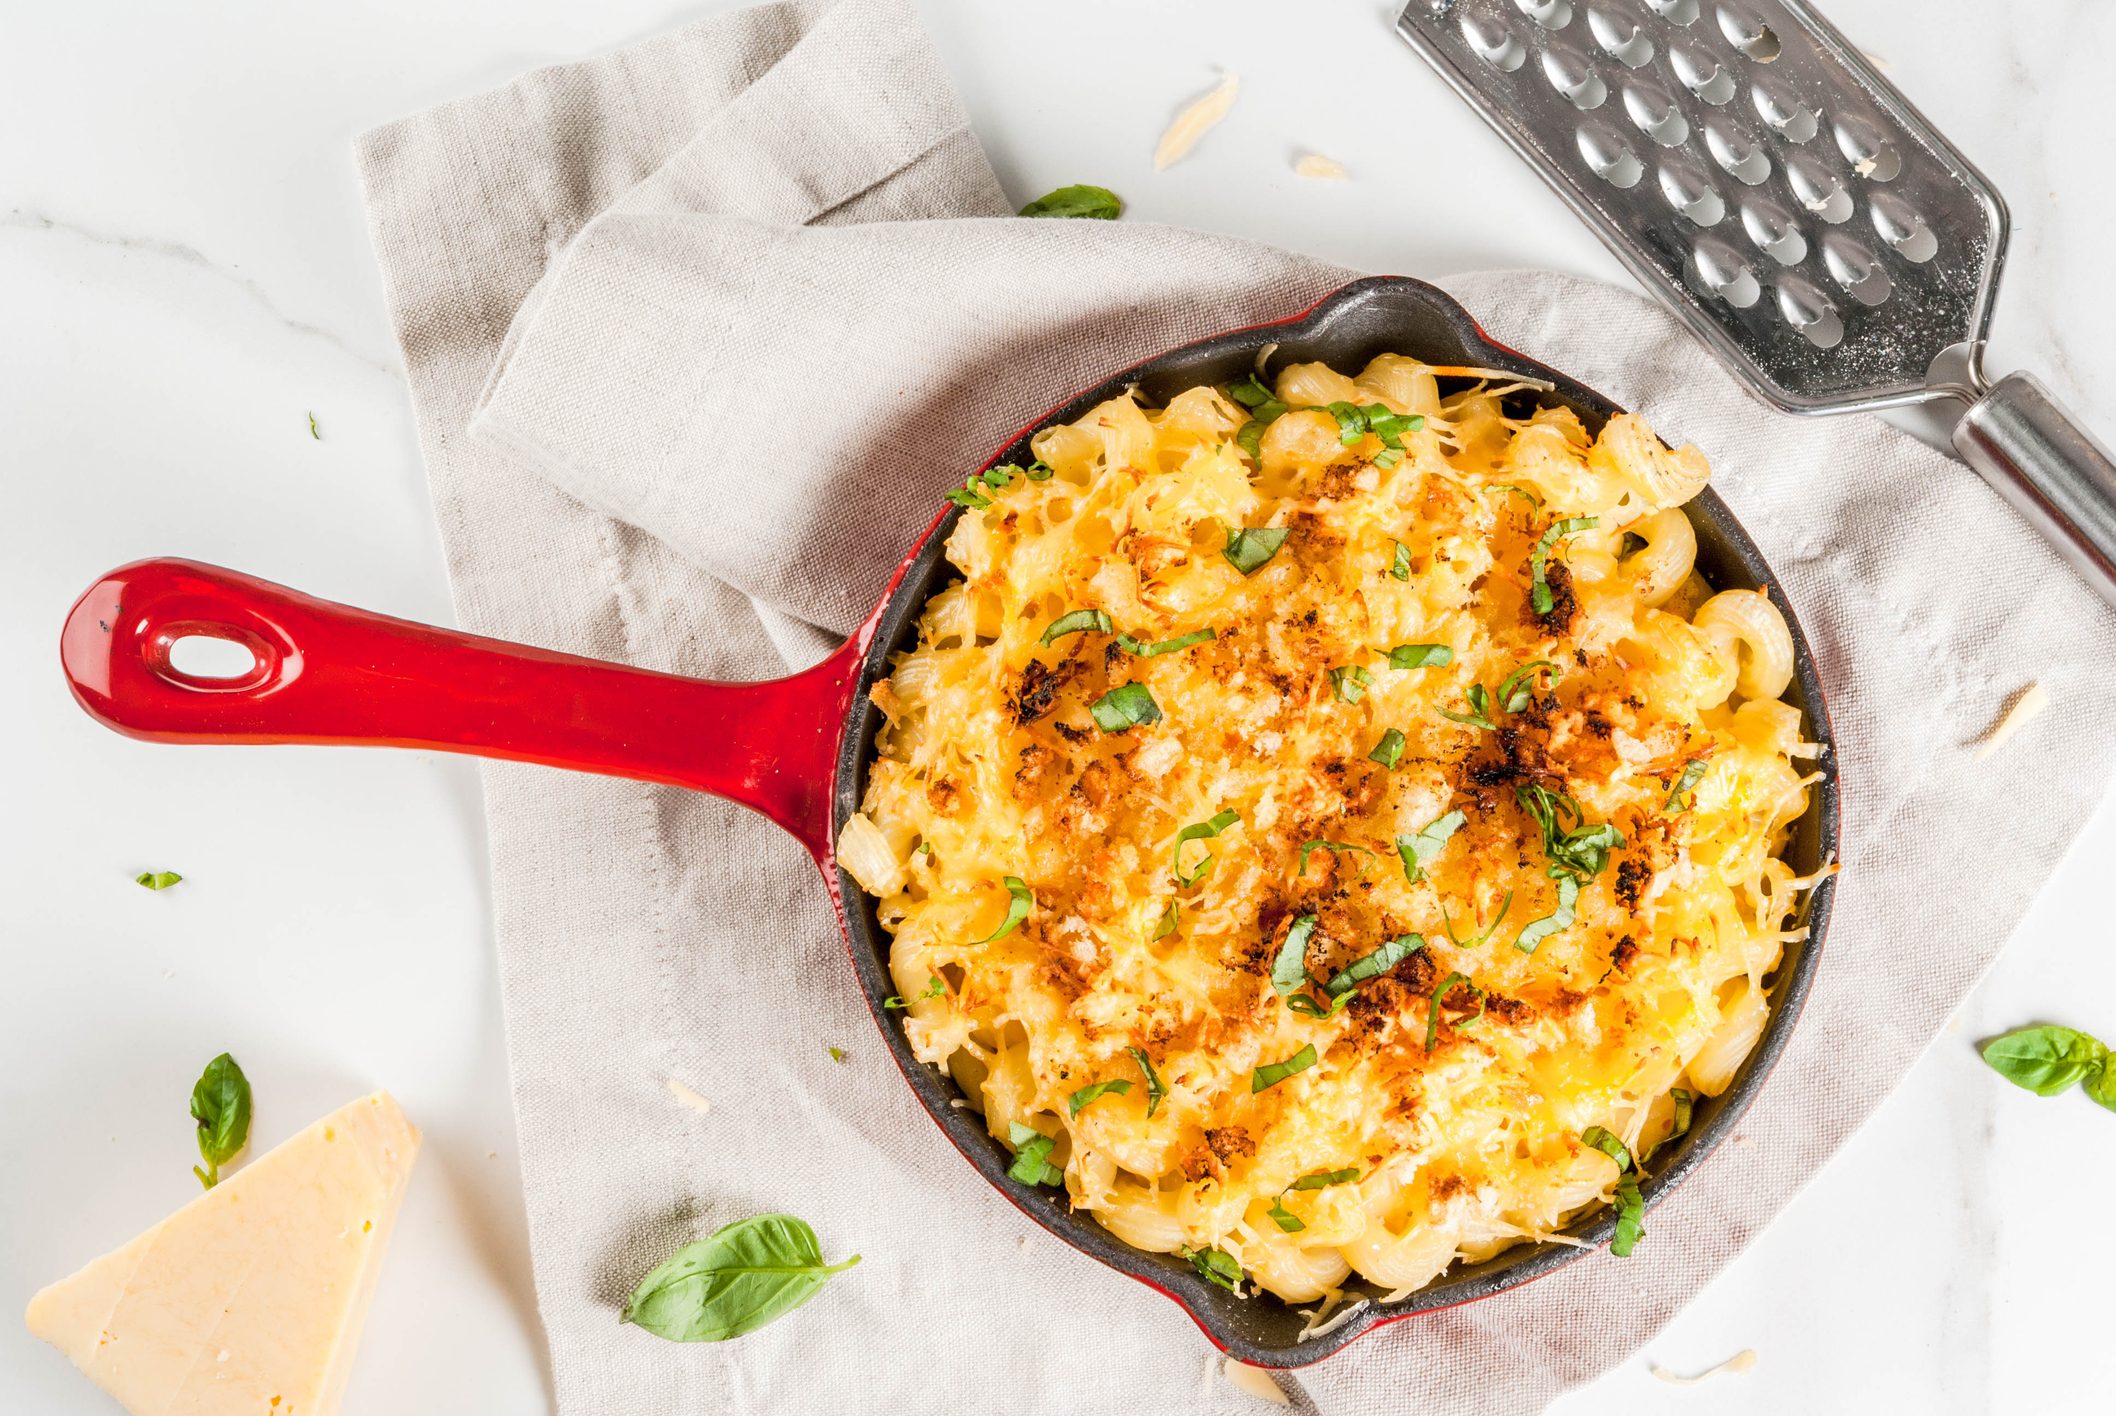 Mac and cheese, american style macaroni pasta with cheesy sauce and crunchy breadcrumbs topping, in portioned pan, white marble table